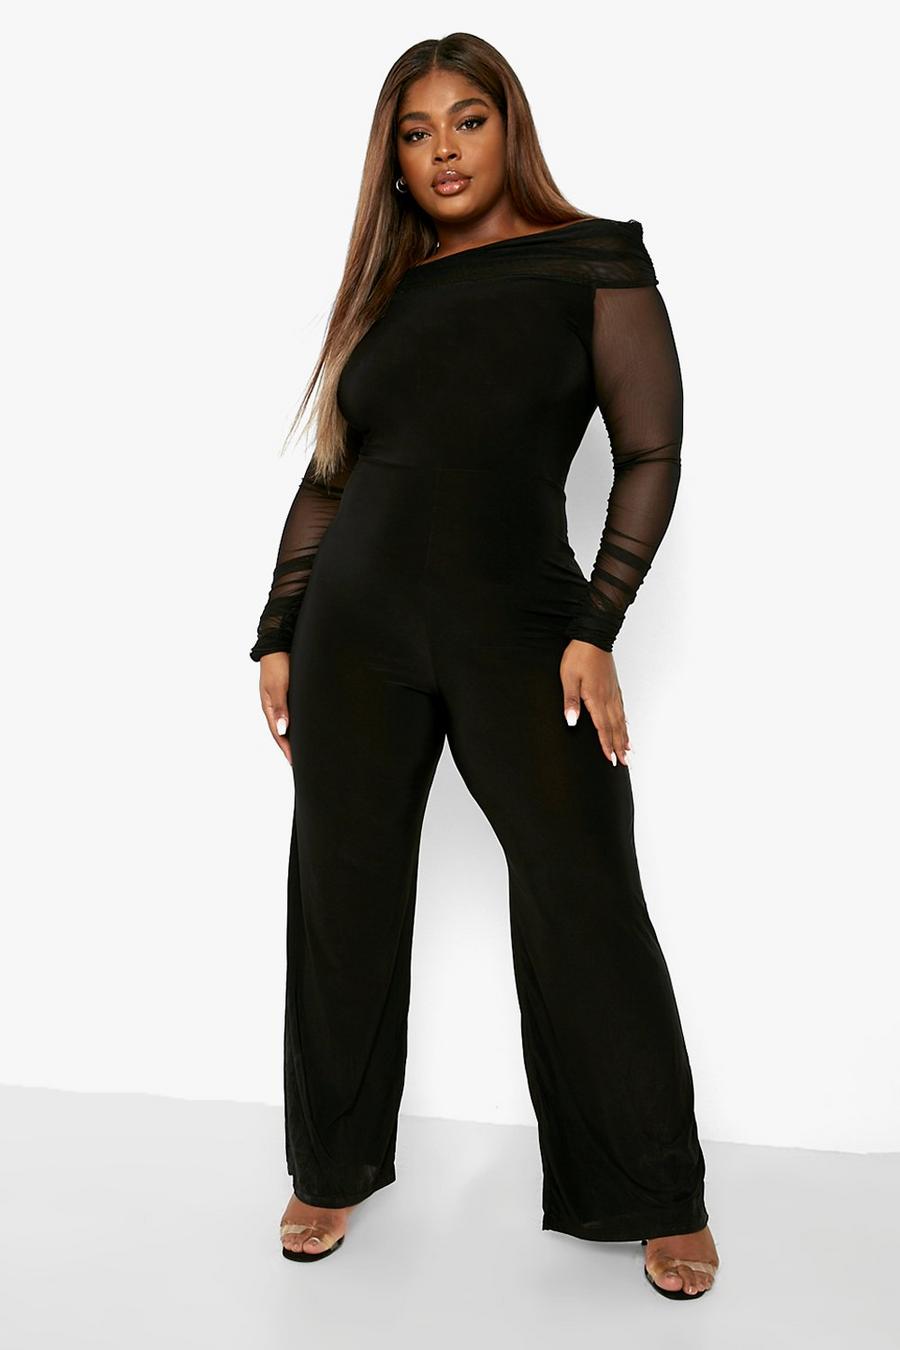 Evening Jumpsuits, Going Out & Party Jumpsuits